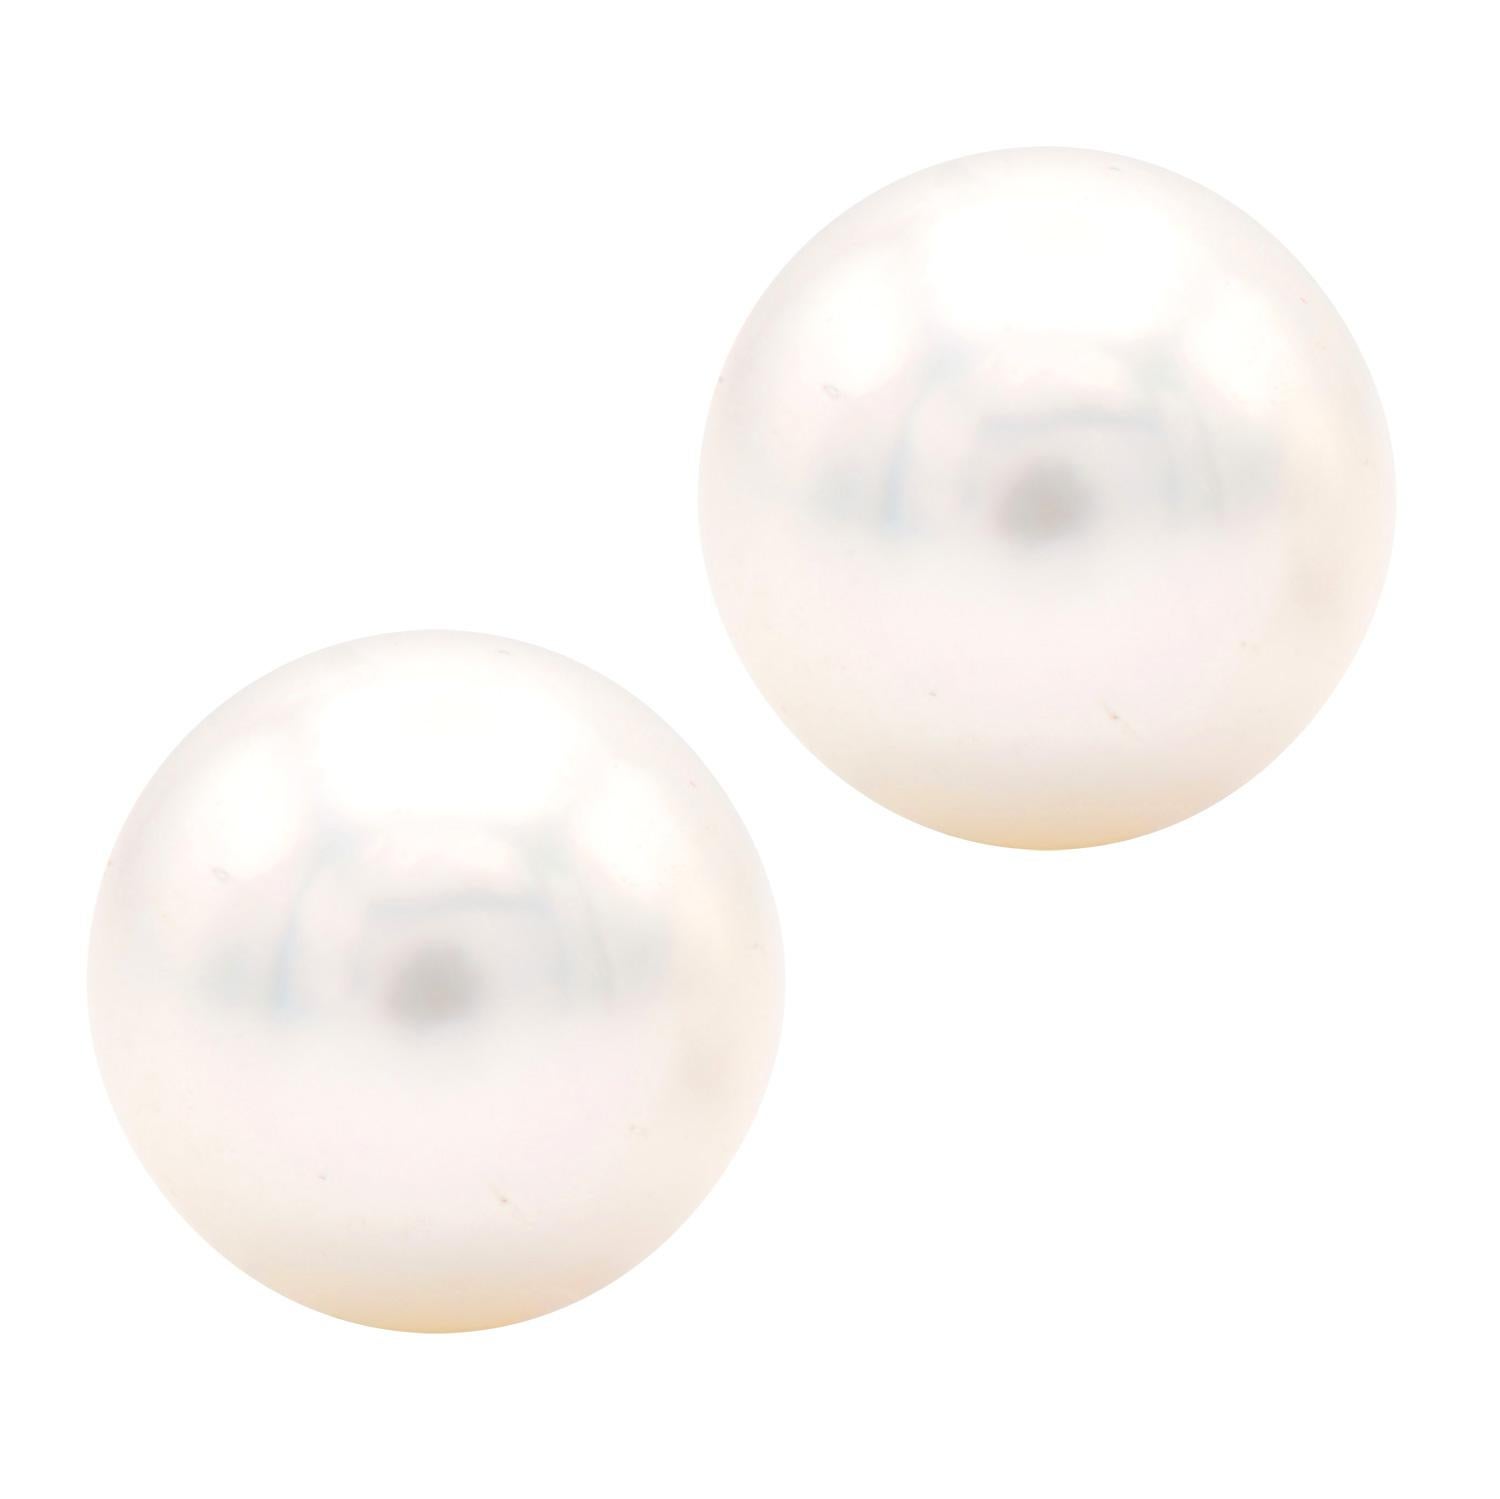 Cultured pearl stud earrings are the most classic and timeless piece of jewelry. They can be worn by anyone and everyone and make an excellent gift for all occasions. These 6-6.5mm cultured pearl earrings are perfectly matched and set in 14 karat